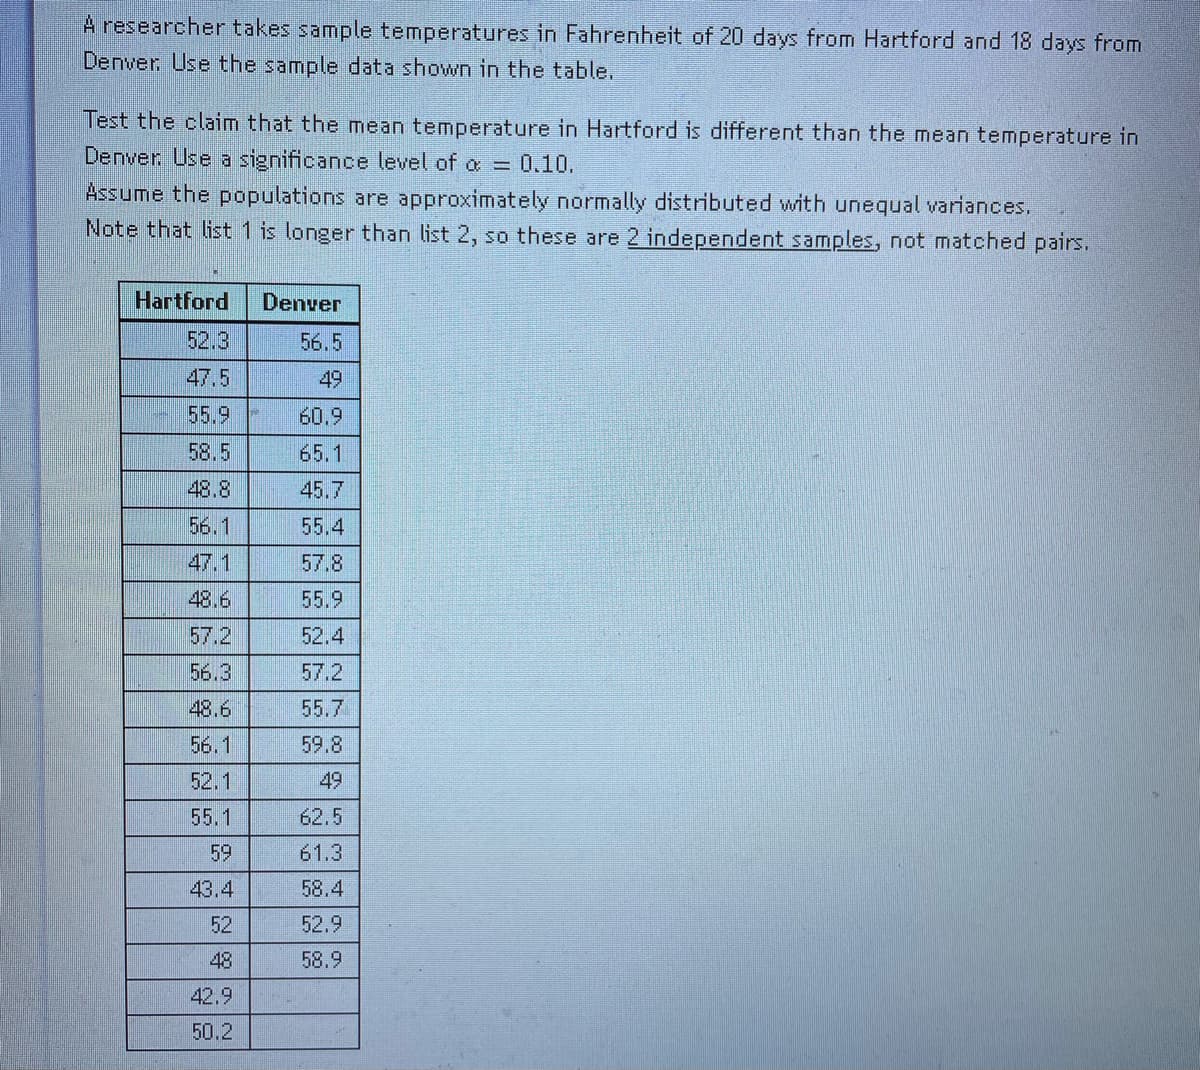 A researcher takes sample temperatures in Fahrenheit of 20 days from Hartford and 18 days from
Denver Use the sample data shown in the table.
Test the claim that the mean temperature in Hartford is different than the mean temperature in
Denver Use a significance level of a = 0.10.
Assume the populations are approximately normally distributed with unequal variances.
Note that list 1 is longer than list 2, so these are 2 independent samples, not matched pairs.
Hartford
Denver
52.3
56.5
47,5
49
55.9
60.9
58.5
65.1
48.8
45.7
56.1
55.4
47.1
57.8
48.6
55.9
57.2
52.4
56.3
57.2
48.6
55.7
56.1
59.8
52.1
49
55.1
62.5
59
61.3
43.4
58.4
52
52.9
48
58.9
42.9
50.2
